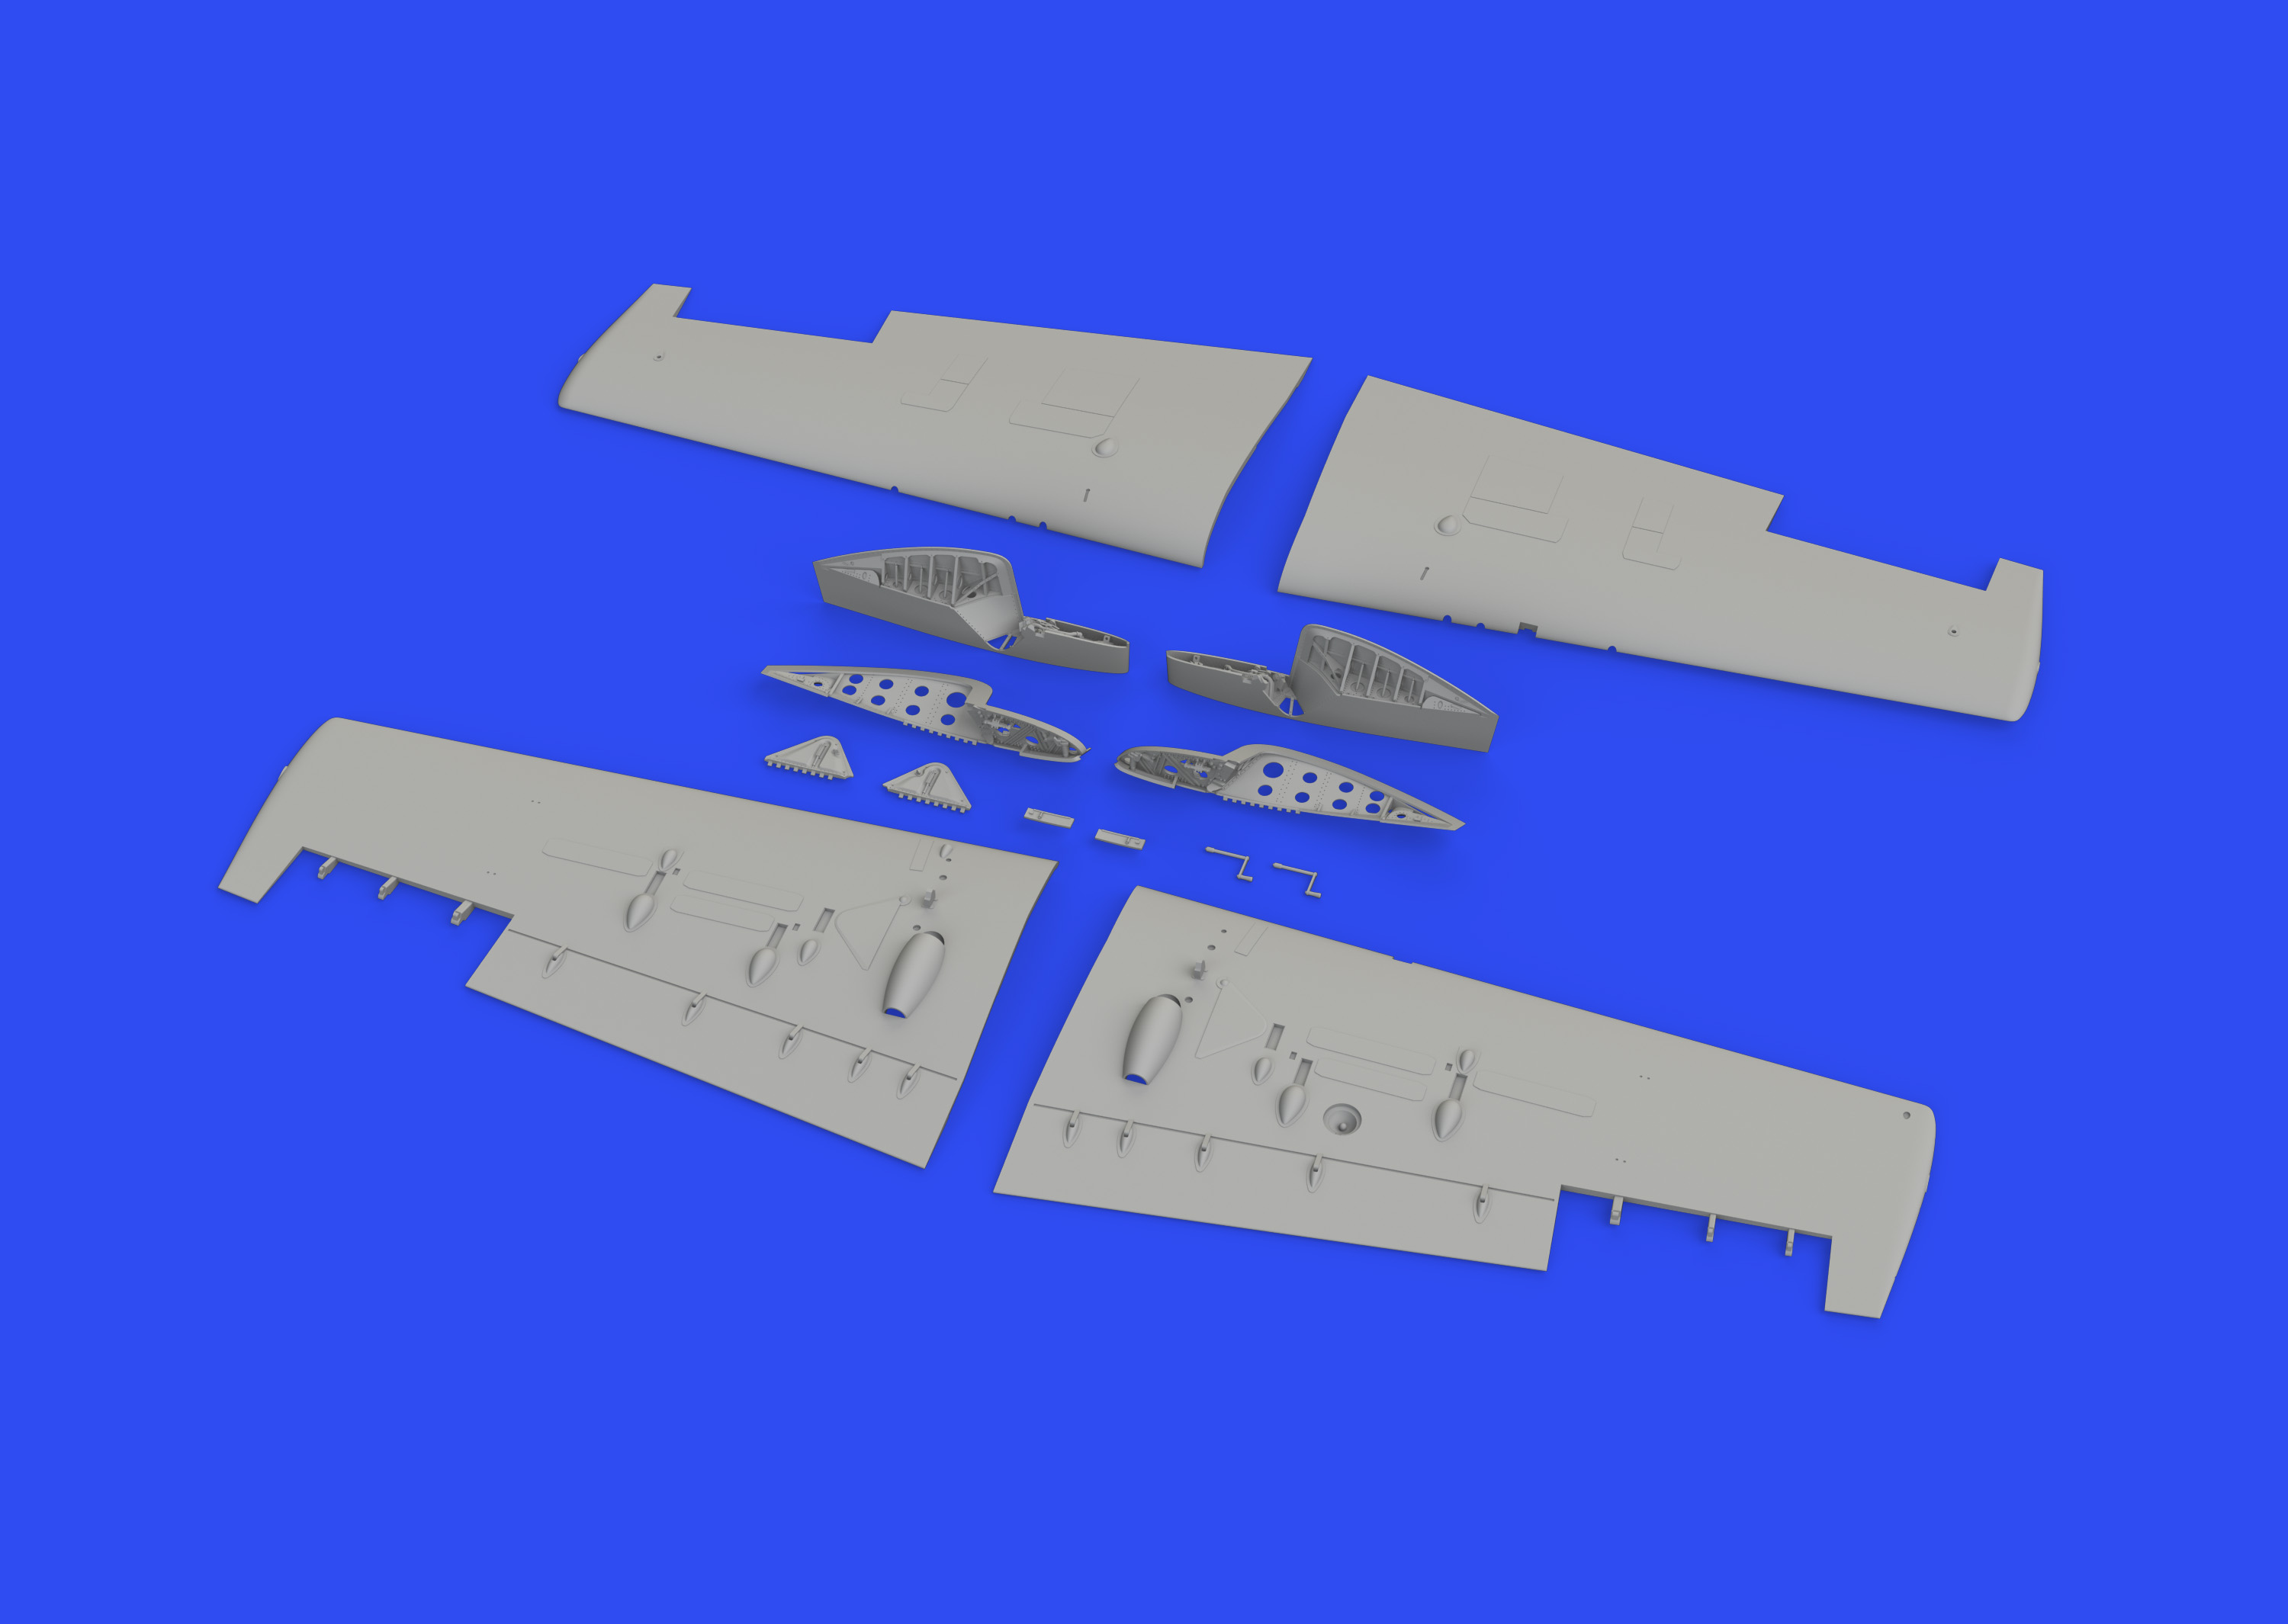 Additions (3D resin printing) 1/48  Grumman F4F-4 Wildcat folding wings 3D-Printed (designed to be used with Eduard kits)